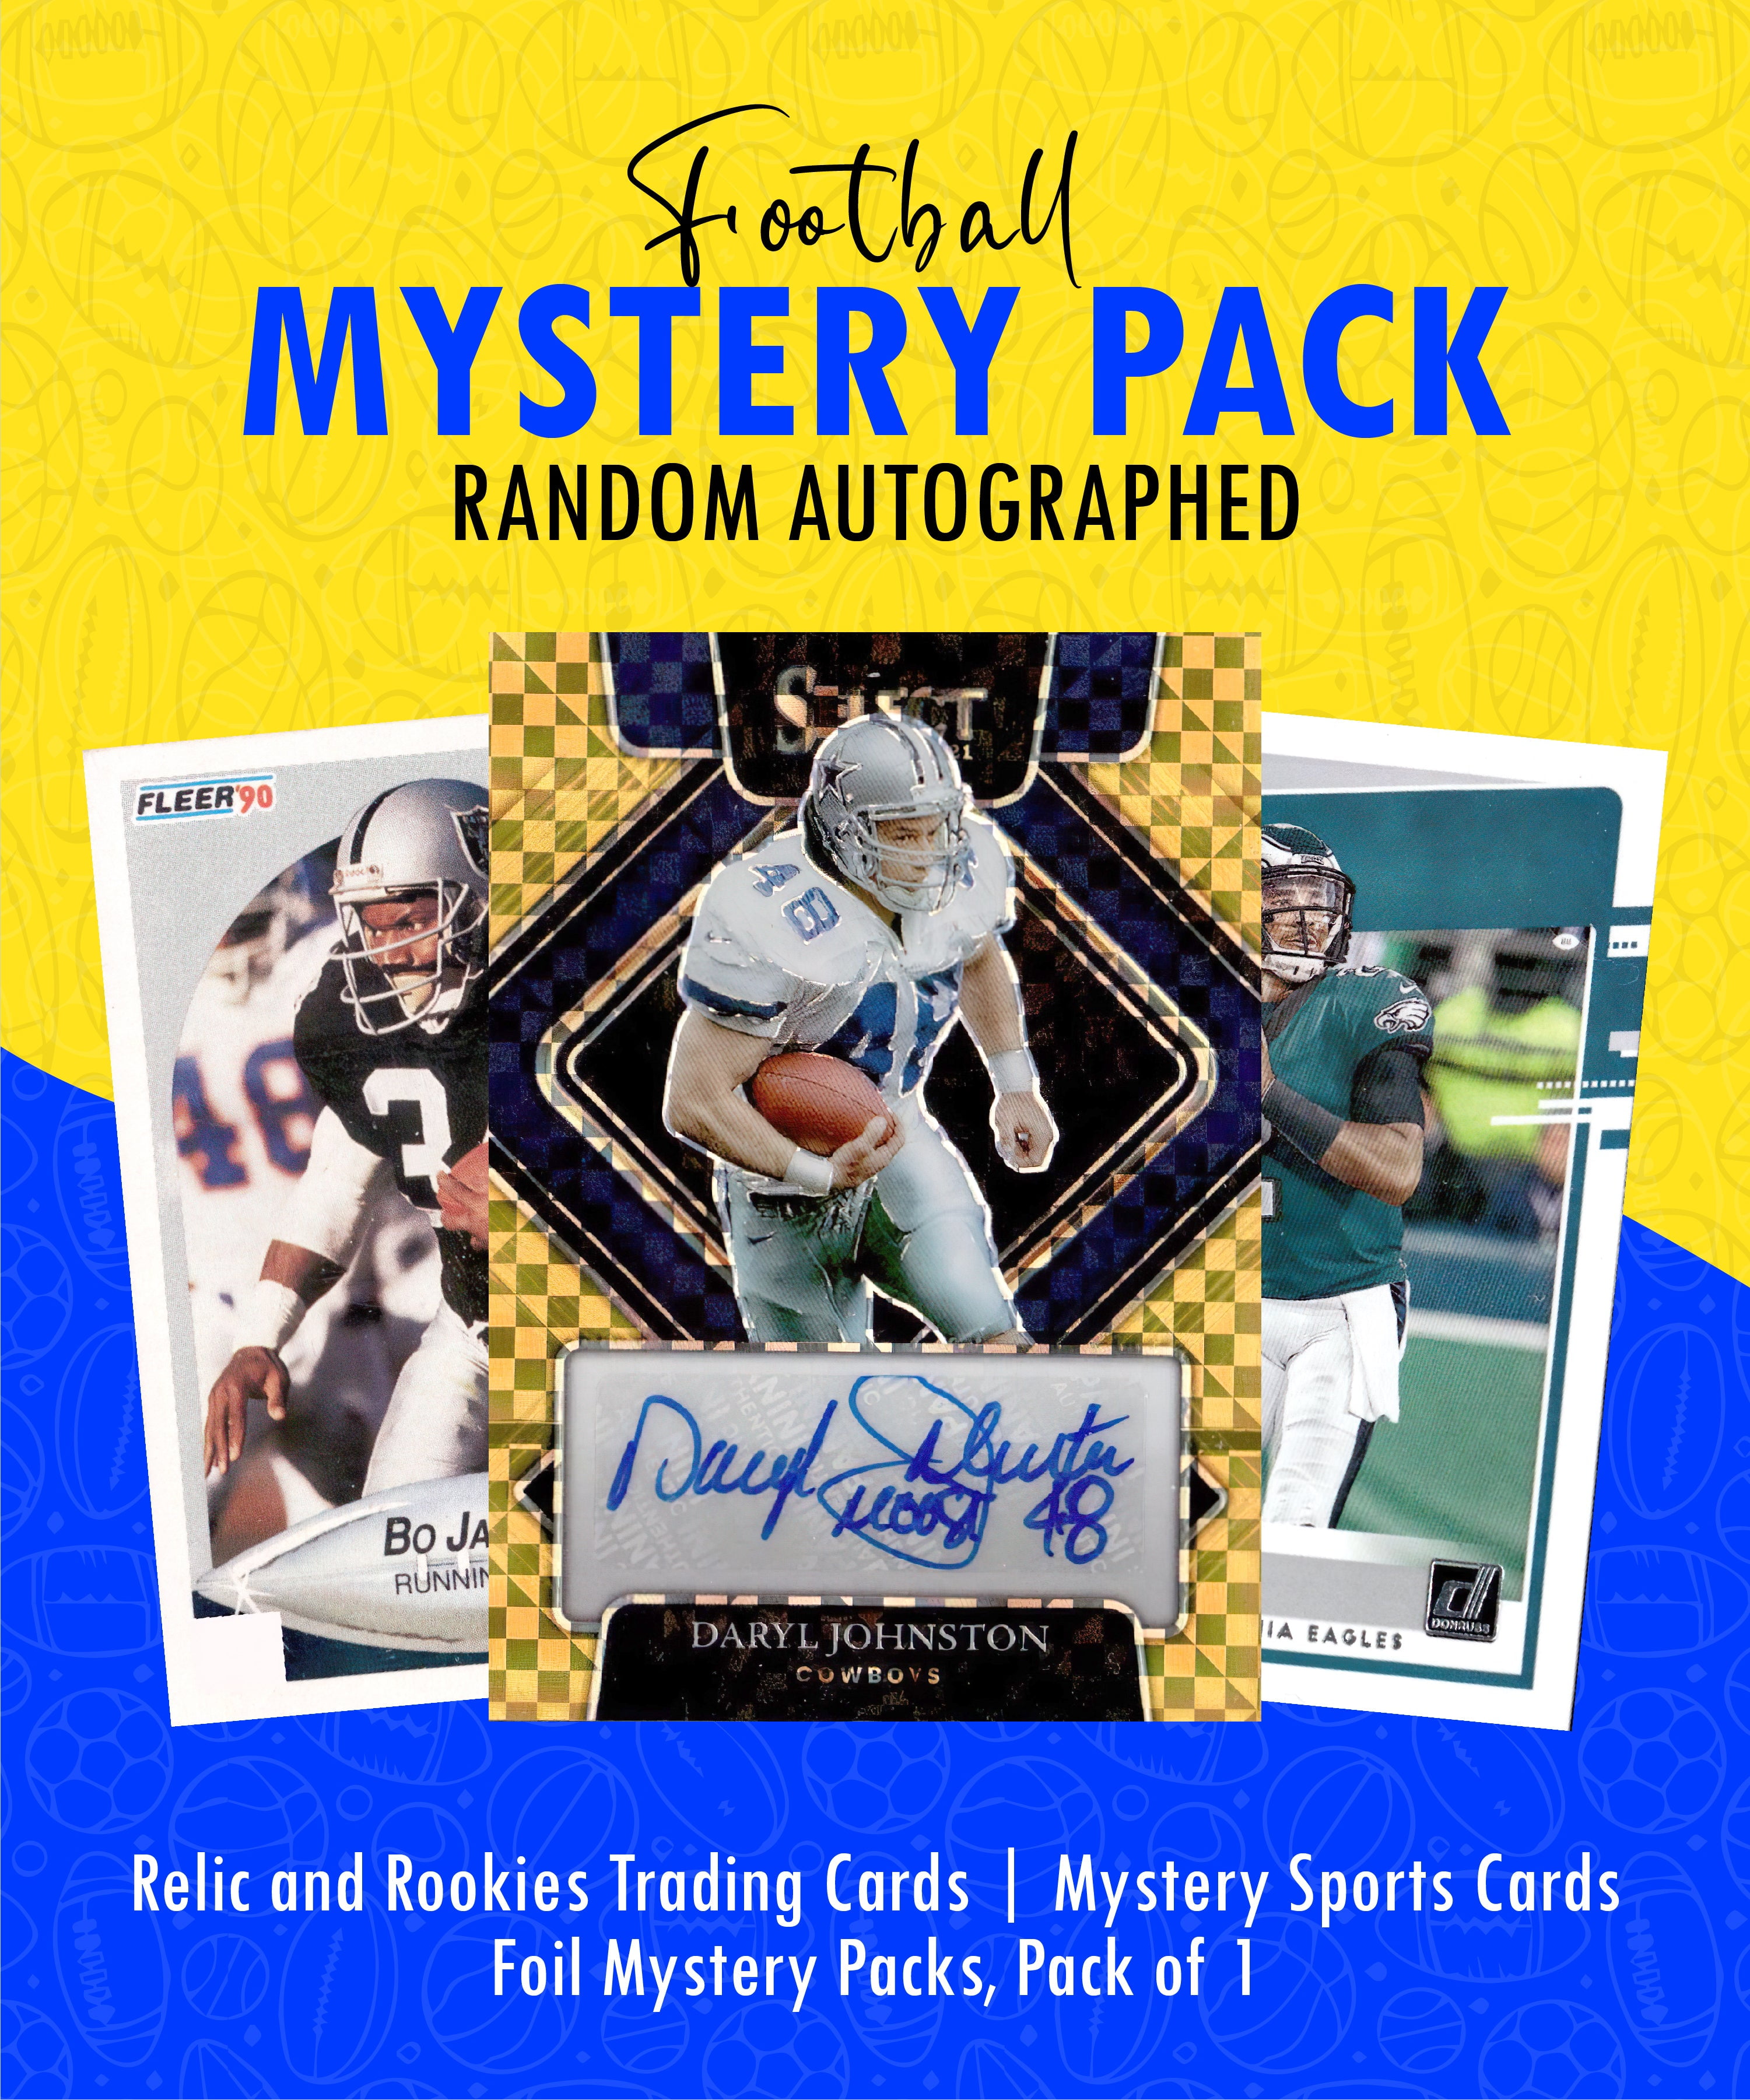 NFL 75 Football Card Mystery Box w/ 3 Certified Autograph/Relic Cards!